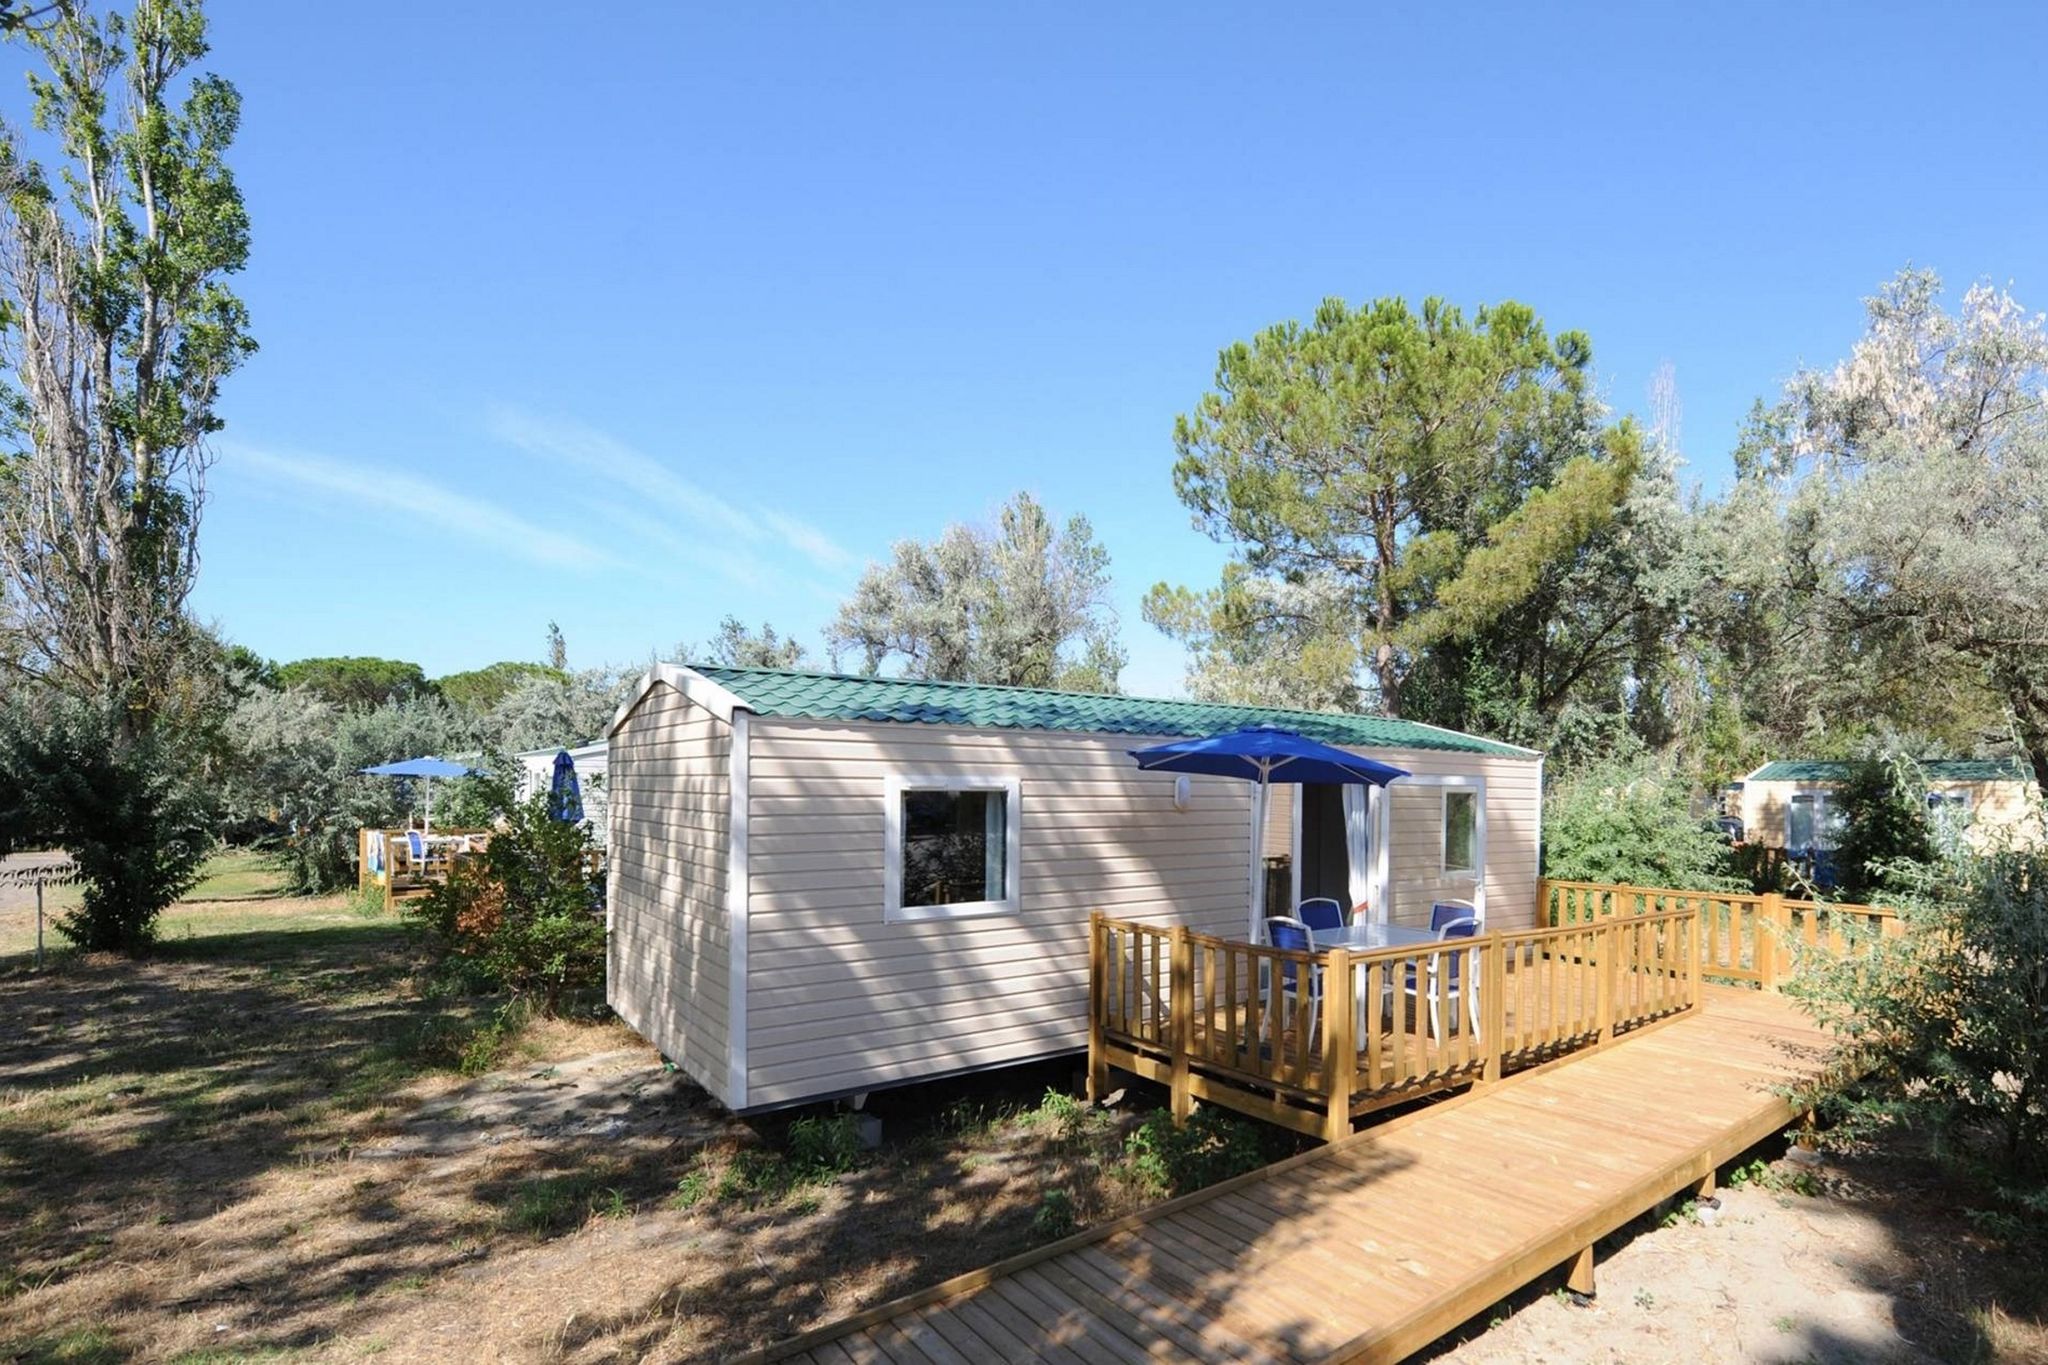 Delightful mobile home in the quaint, green Camargue surroundings